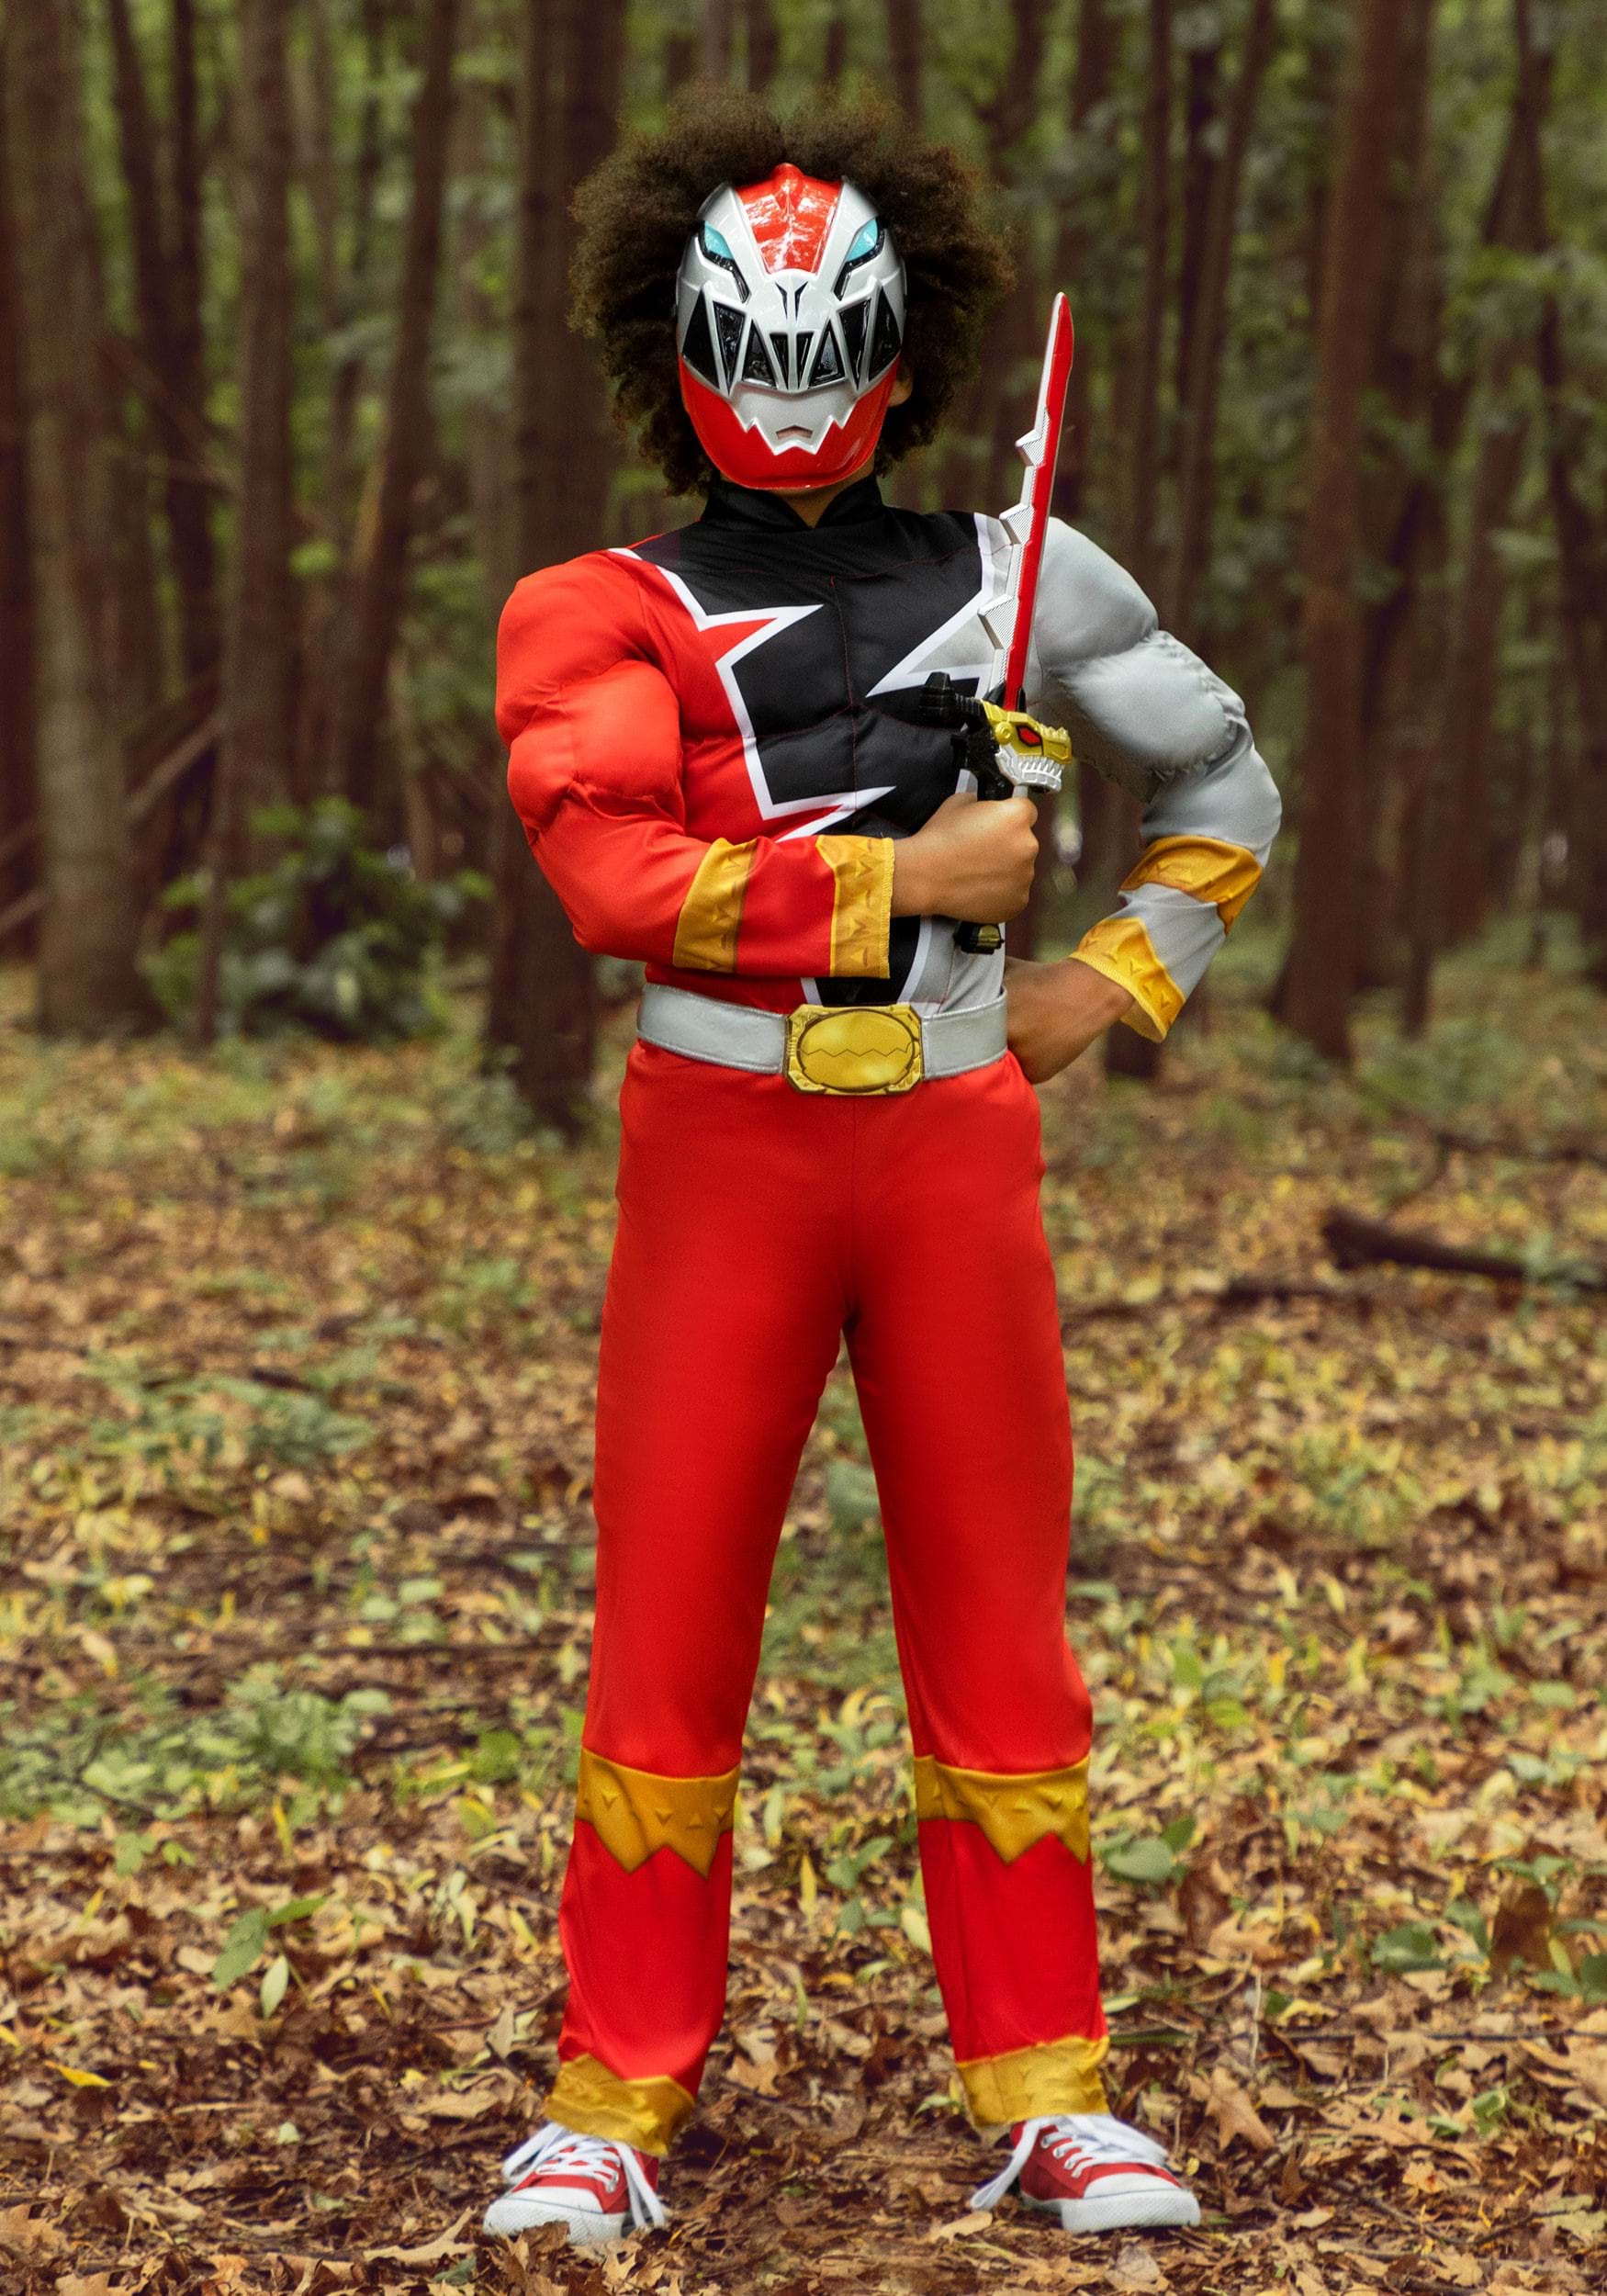 Boy's Red Ranger Dino Fury Muscle Costume